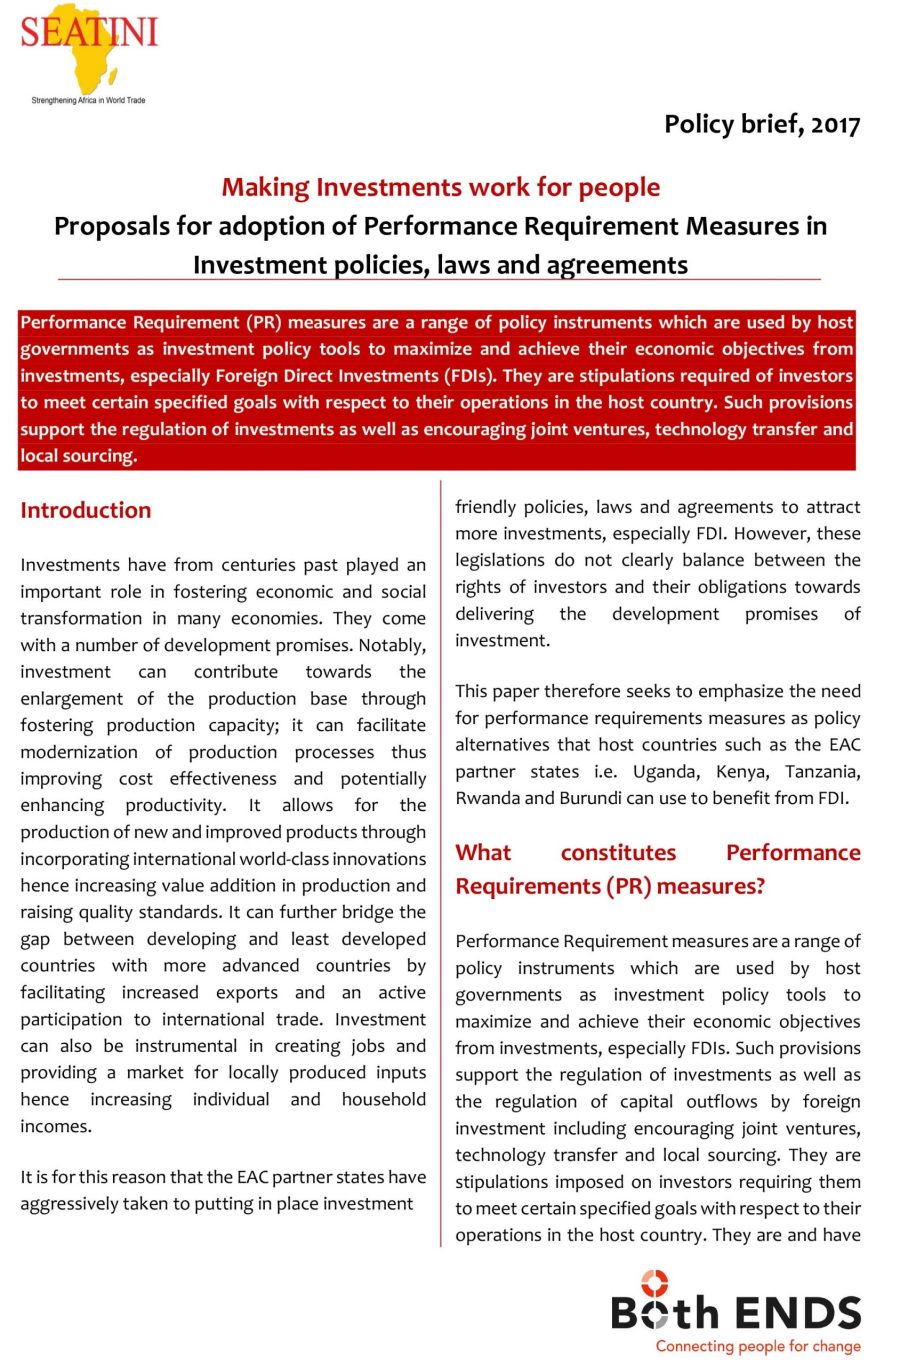 Making Investments Work for People: Proposals for adoption of Performance Requirement Measures in Investment Policies, Laws and Agreements